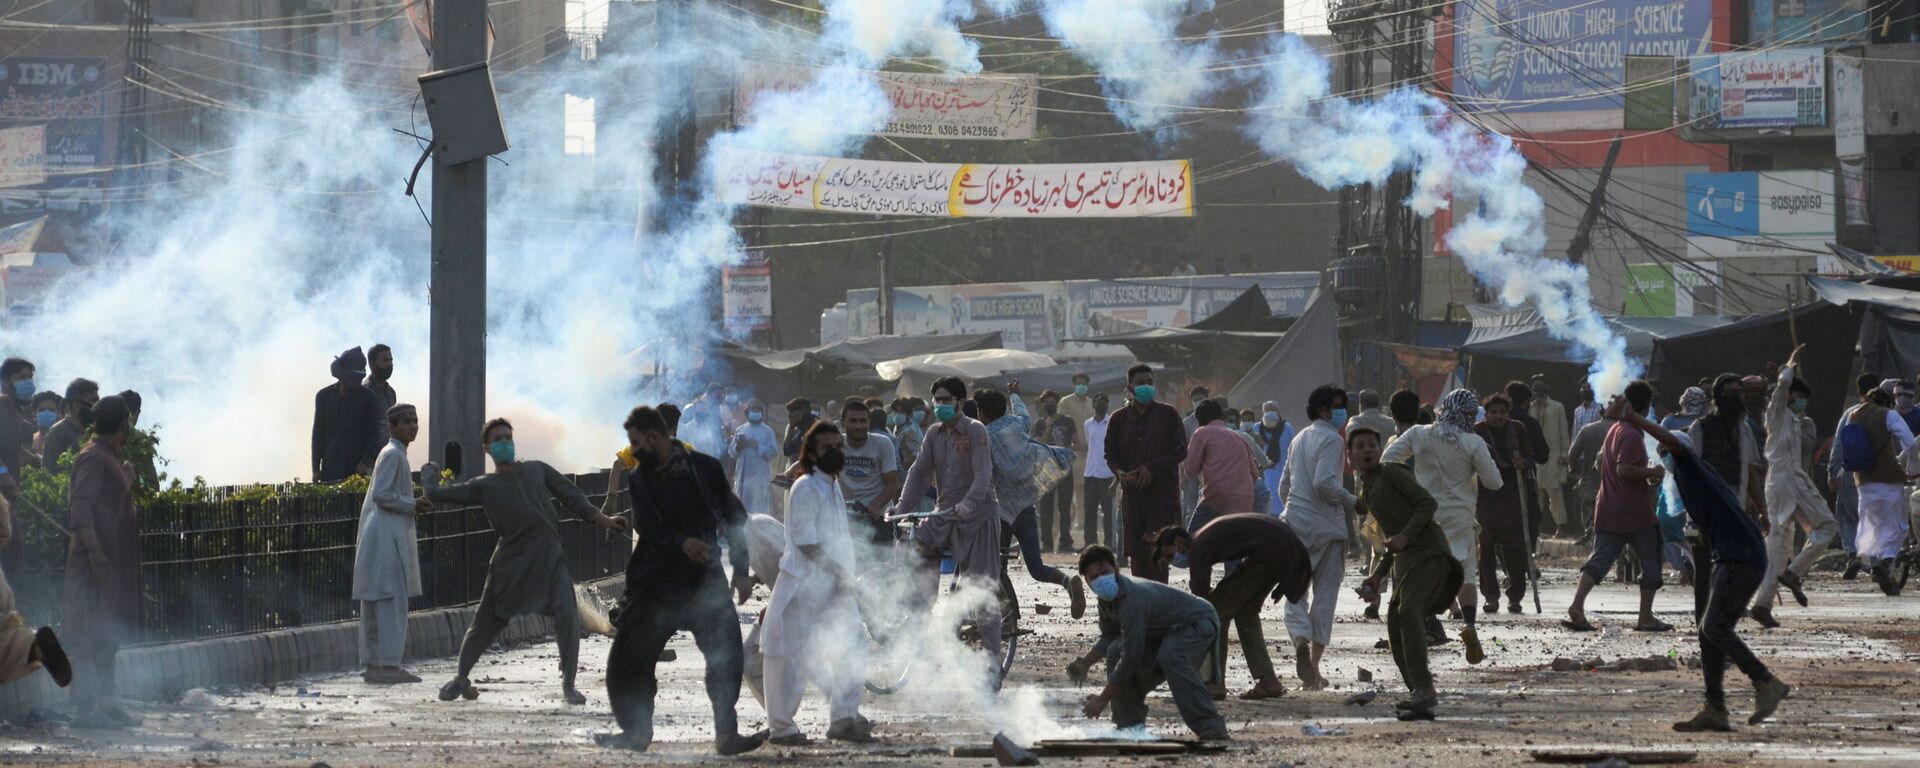 Supporters of the Tehreek-e-Labaik Pakistan (TLP) Islamist political party throwback tear gas canisters fired by police during a protest against the arrest of their leader in Lahore, Pakistan April 13, 2021. - Sputnik International, 1920, 27.10.2021